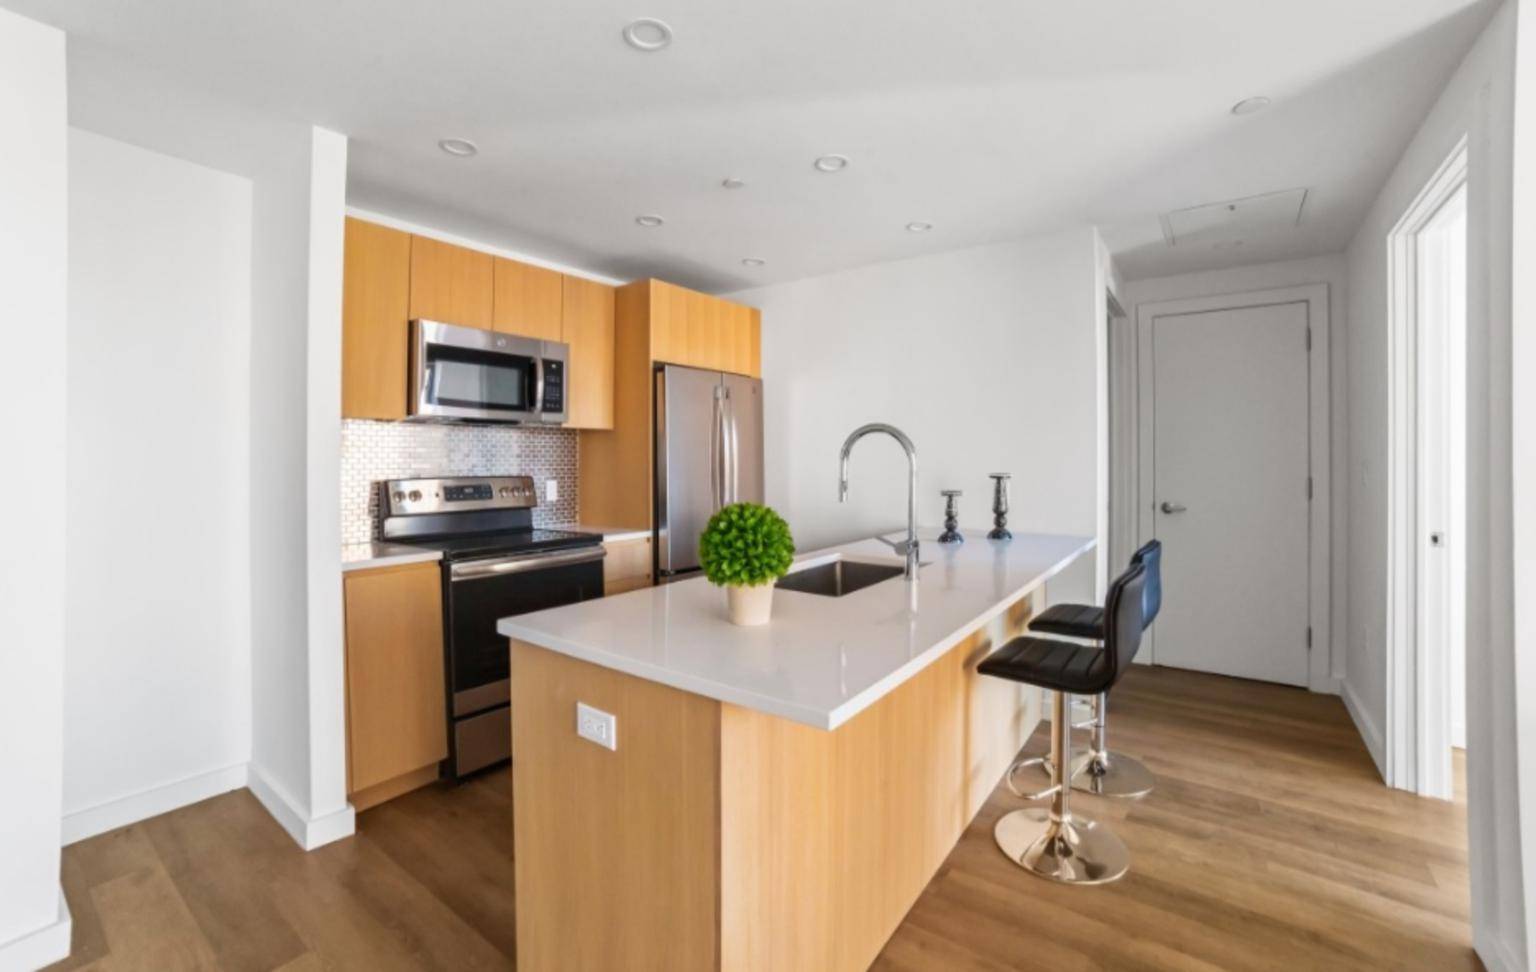 Large 2 bed, 2 bathroom with split floor plan, natural light and features an in unit washer dryer, expansive chefs kitchen, subway tiled bathroom, large windows allowing endless sunlight, and ...